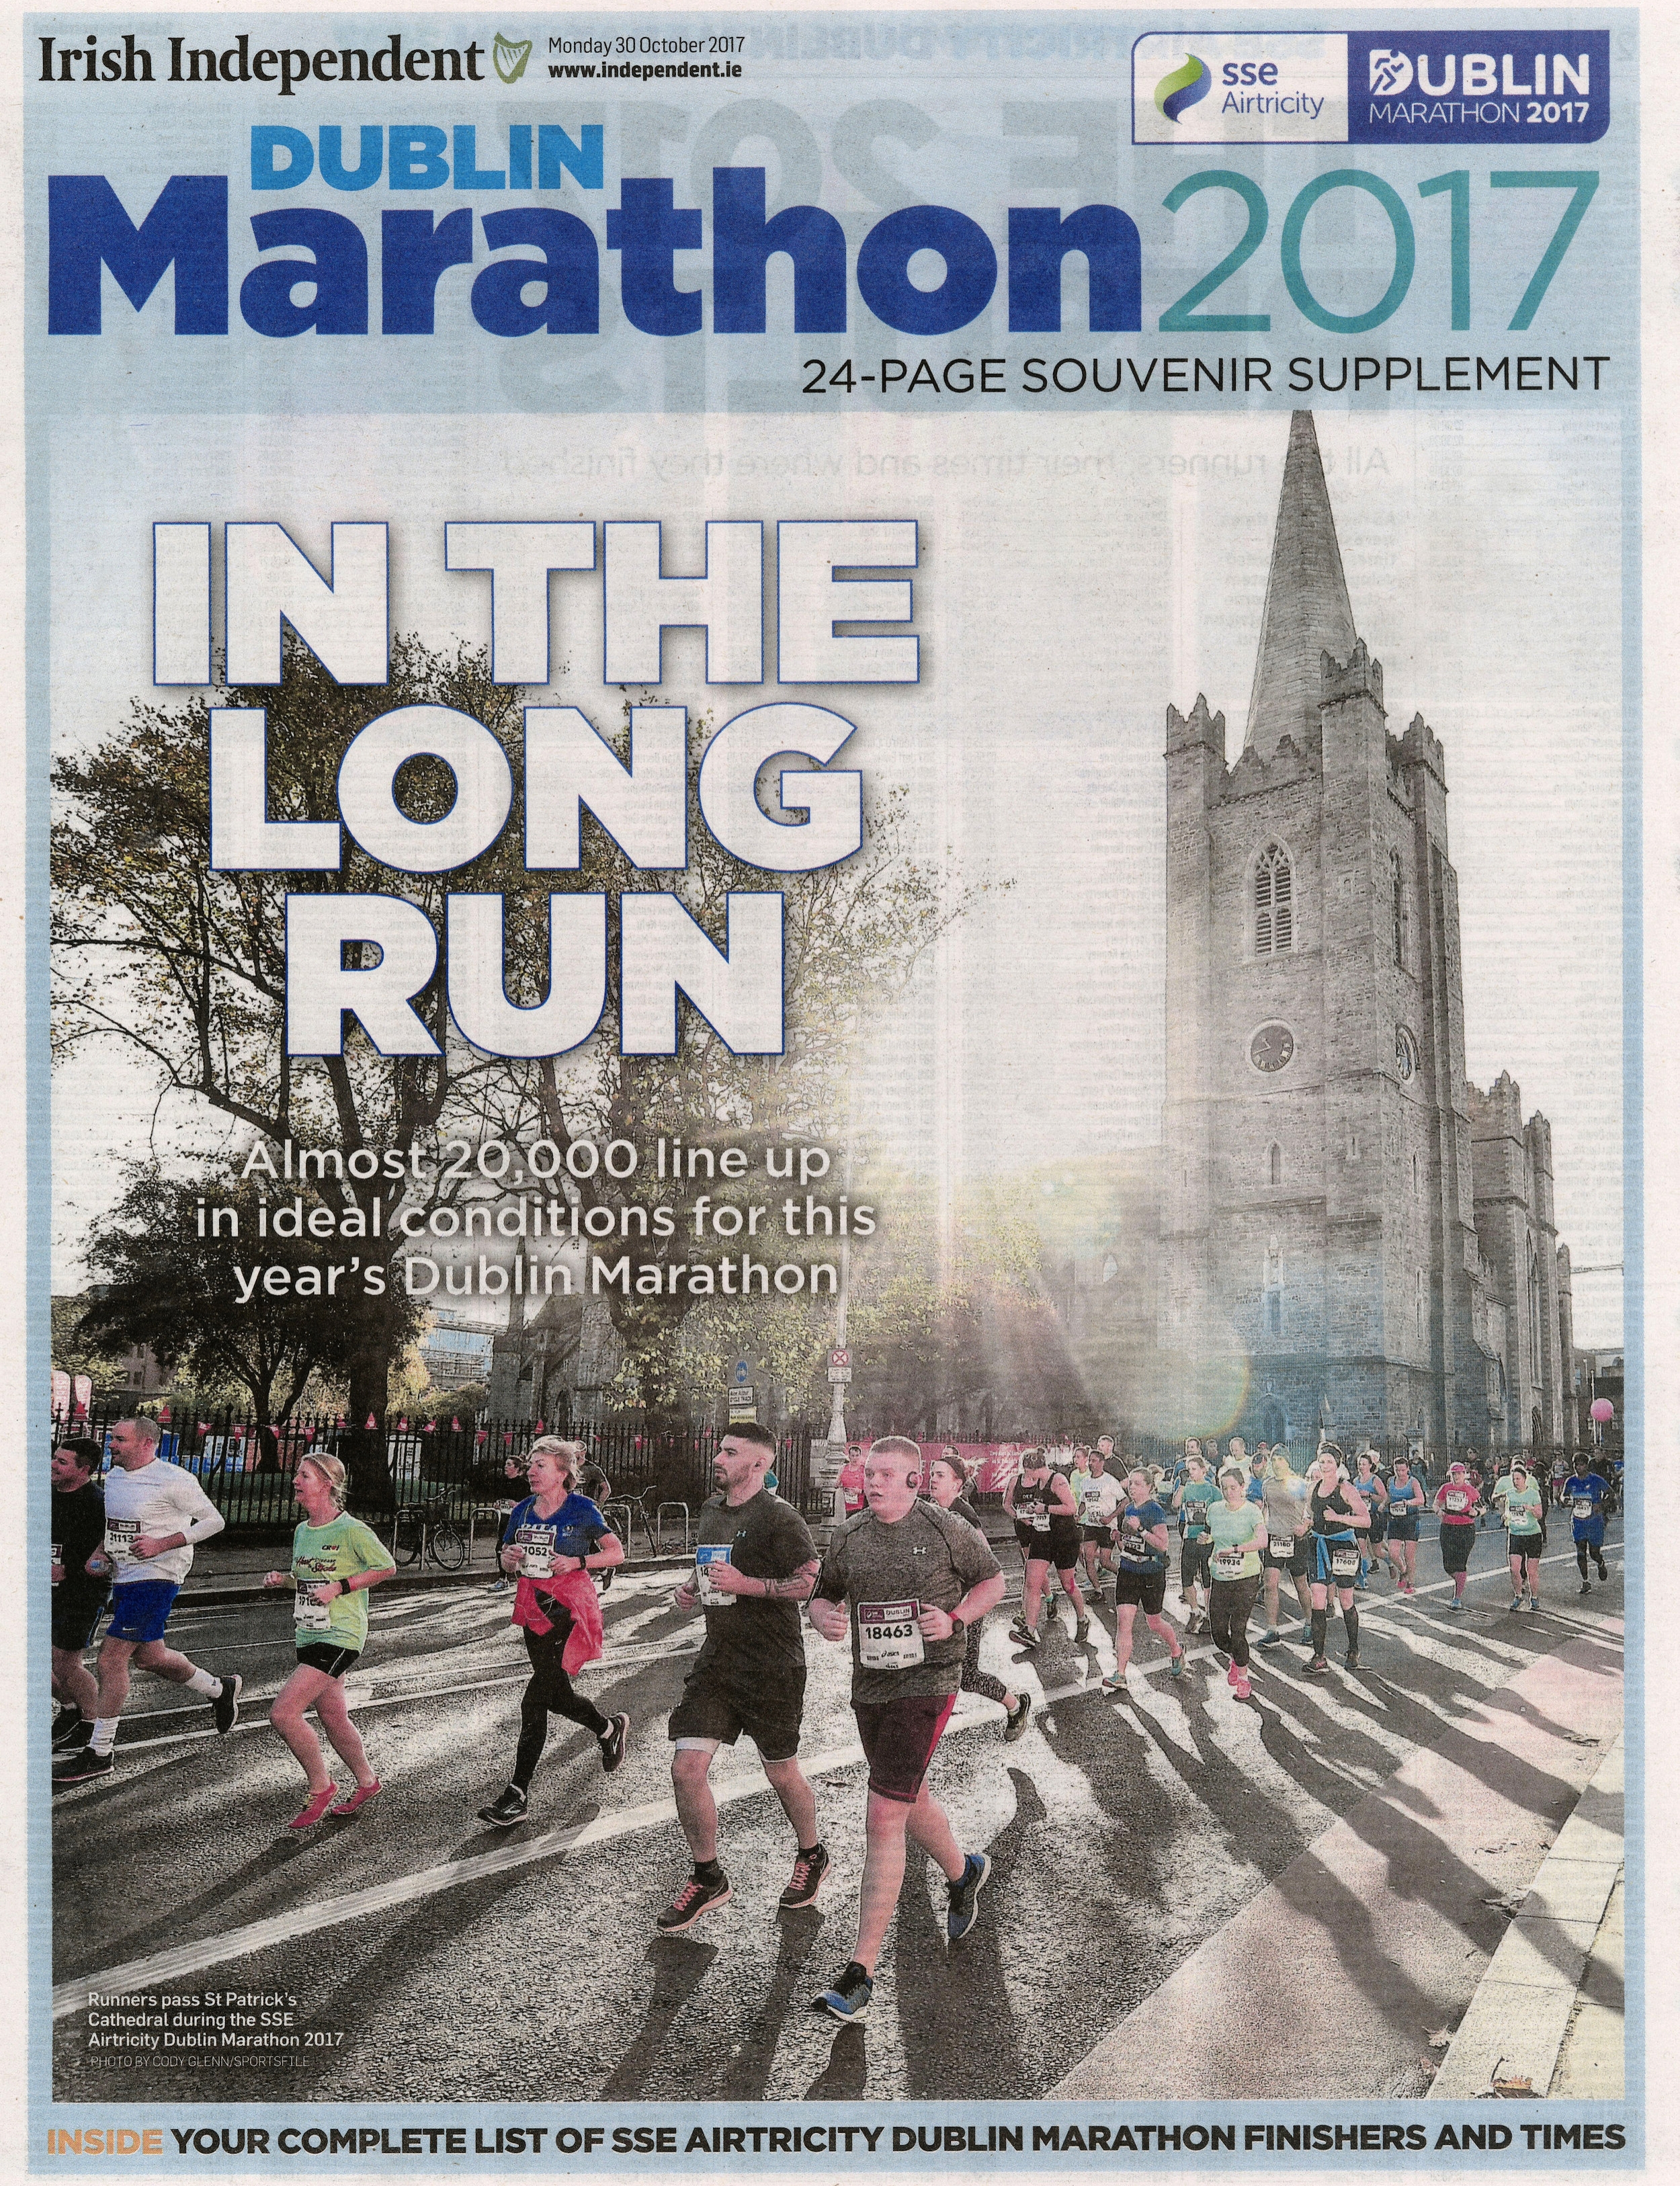  Runners pass St. Patrick's Cathedral during the Dublin Marathon October 30 2017  Irish Independent  